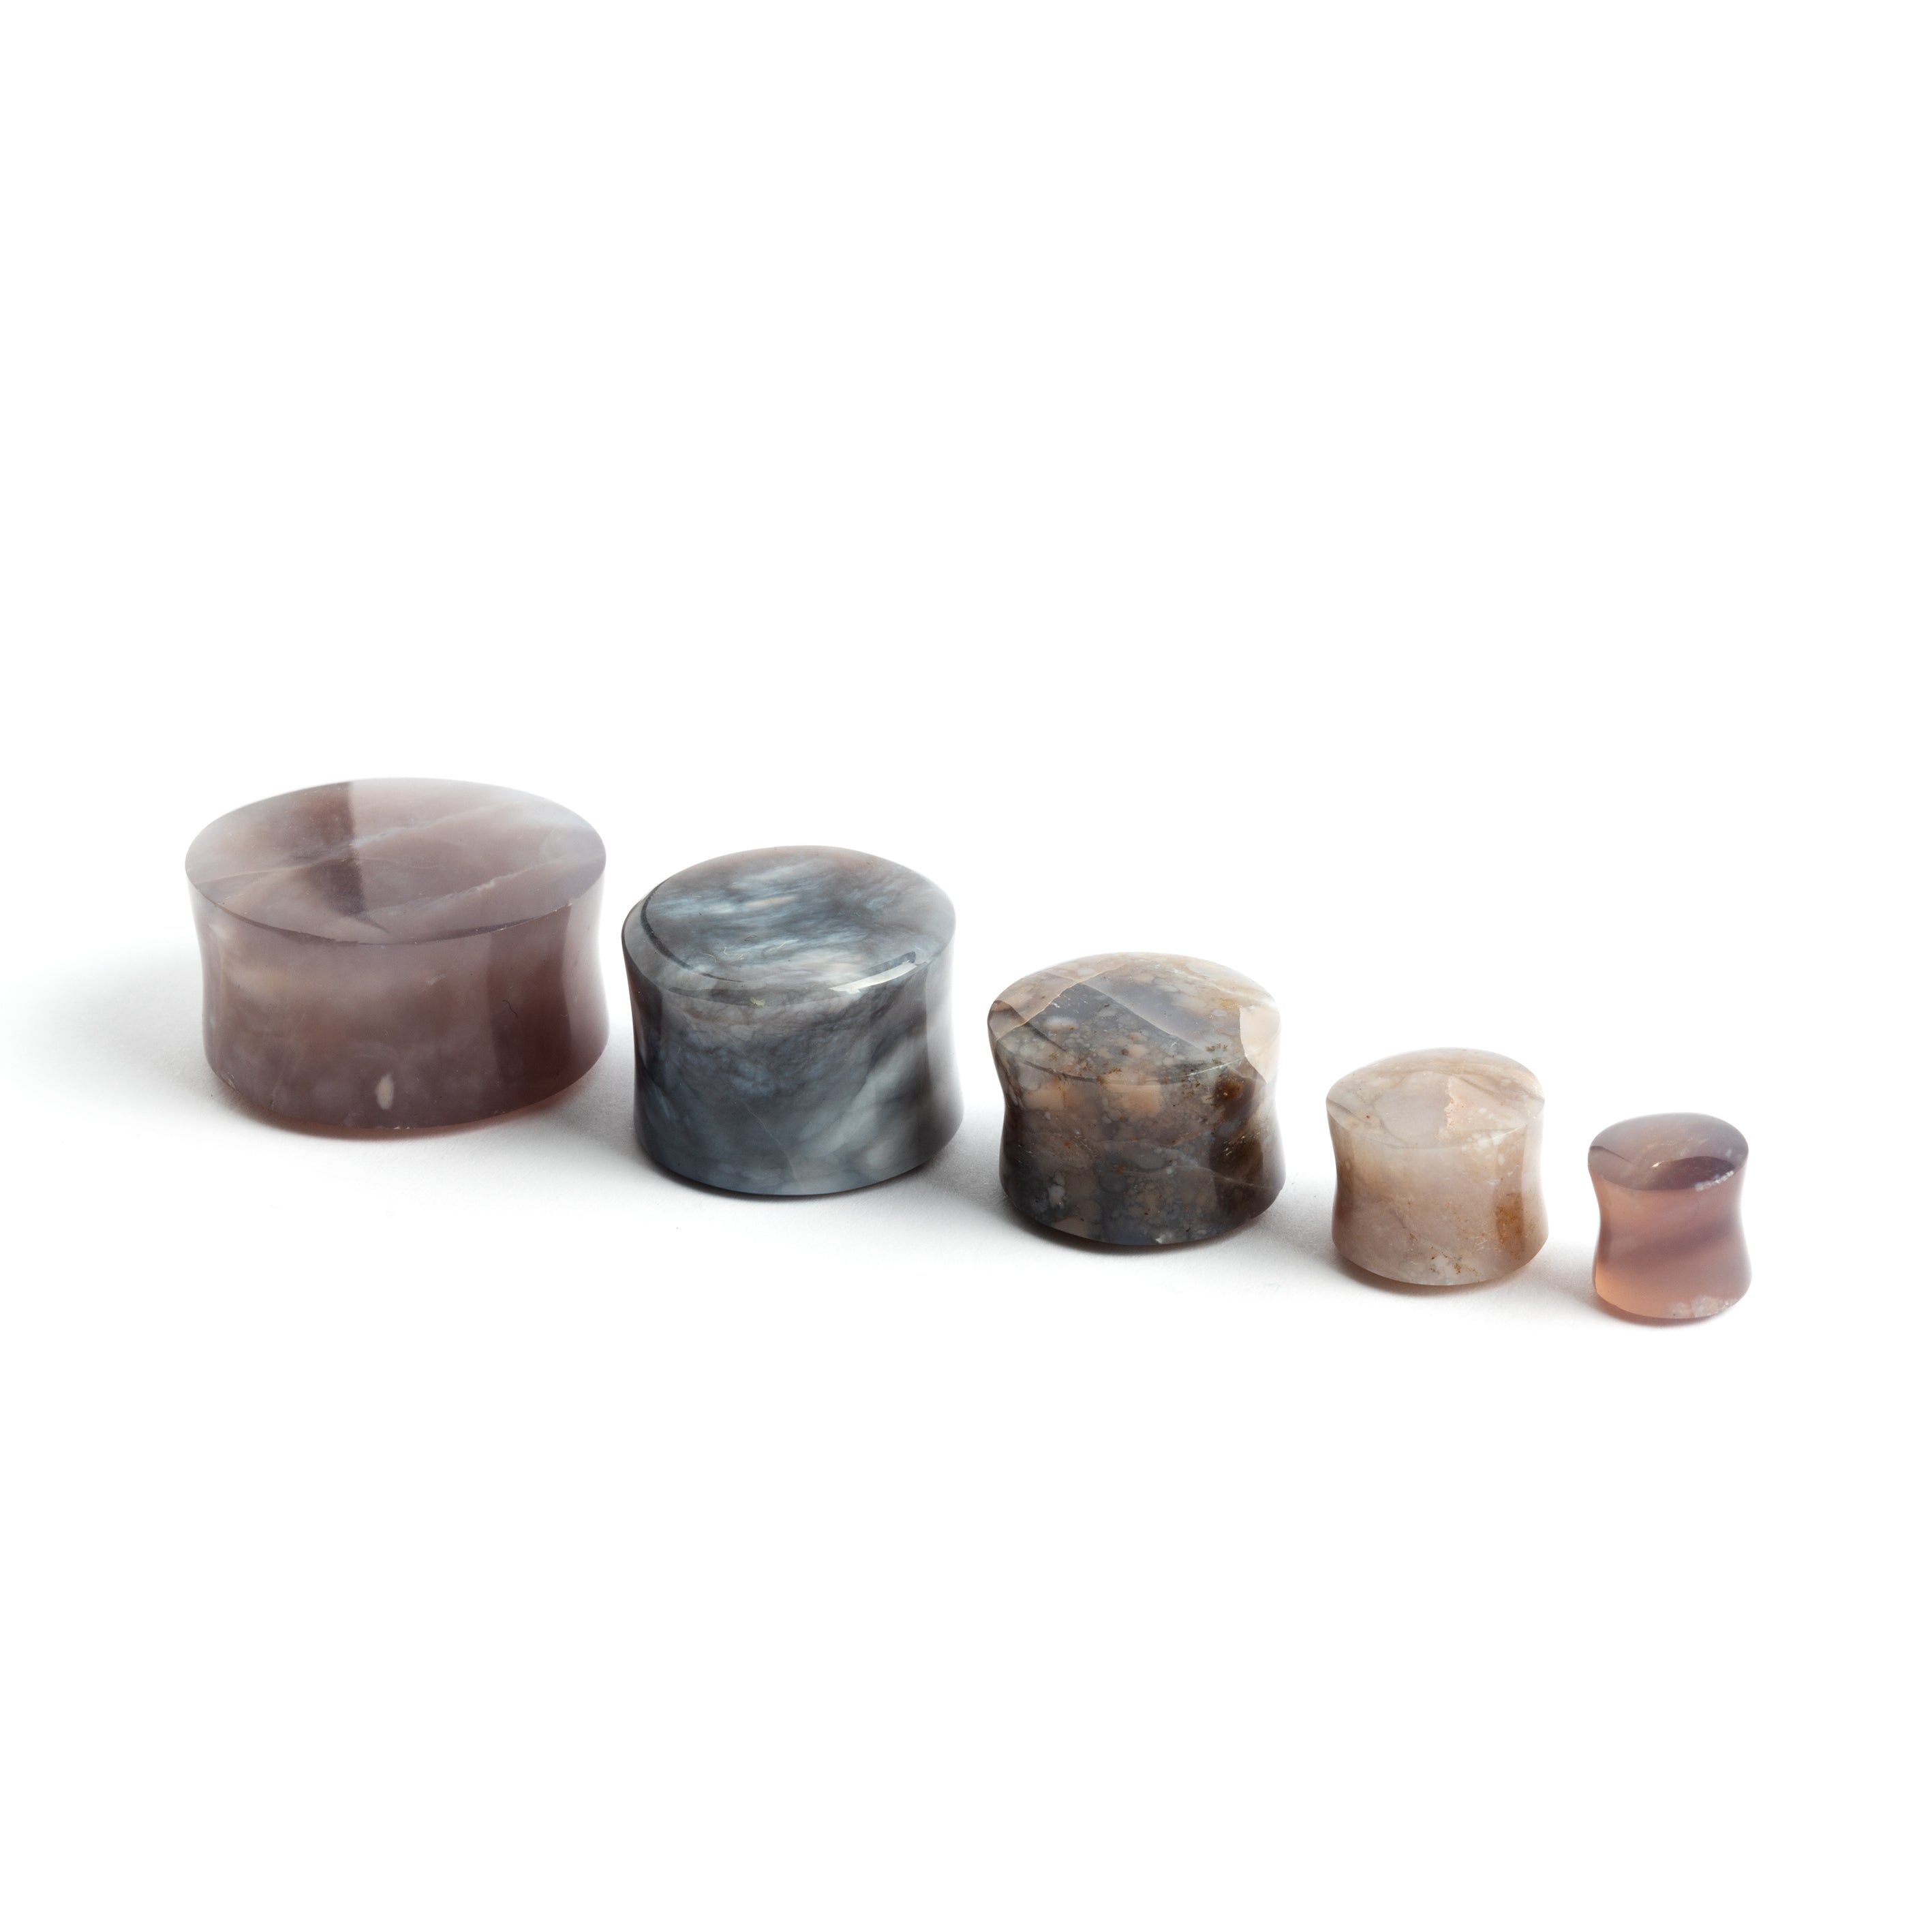 several sizes of lavender double flare stone ear plugs side view